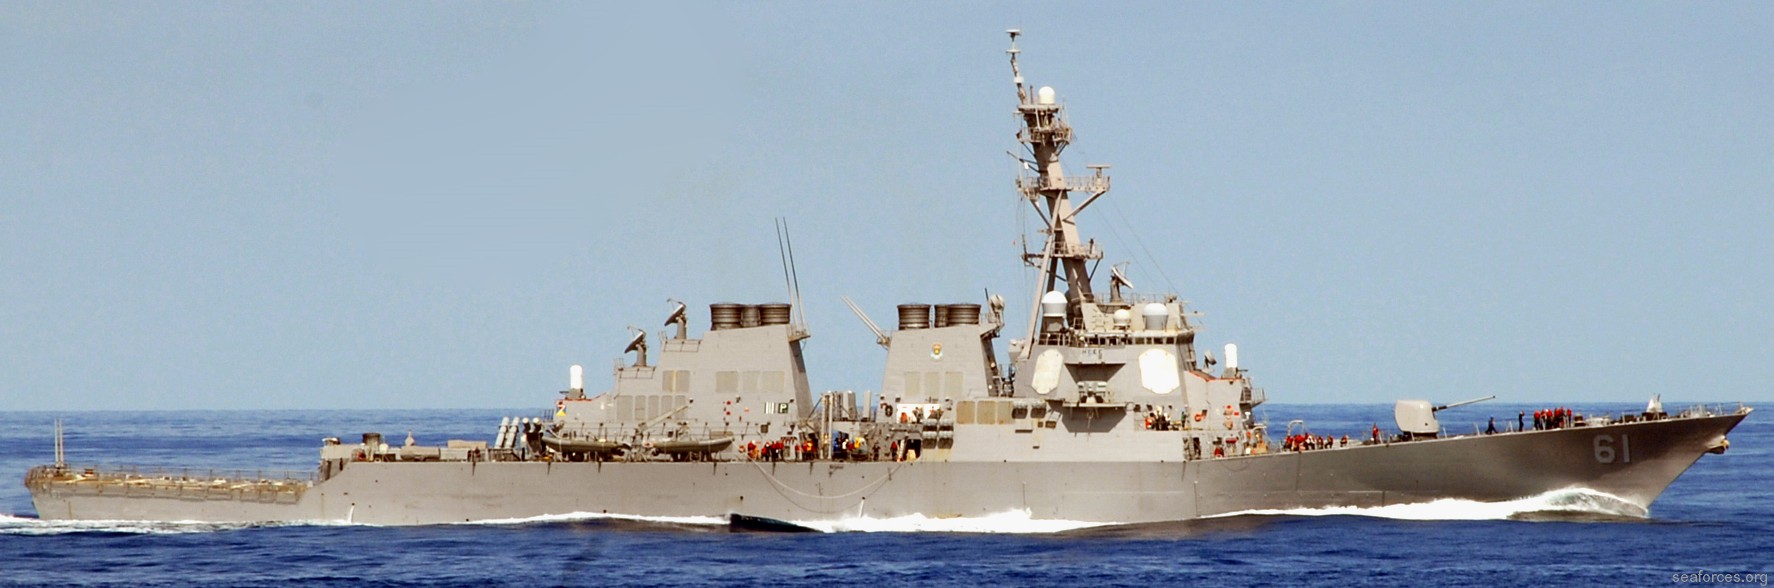 ddg-61 uss ramage guided missile destroyer us navy 45